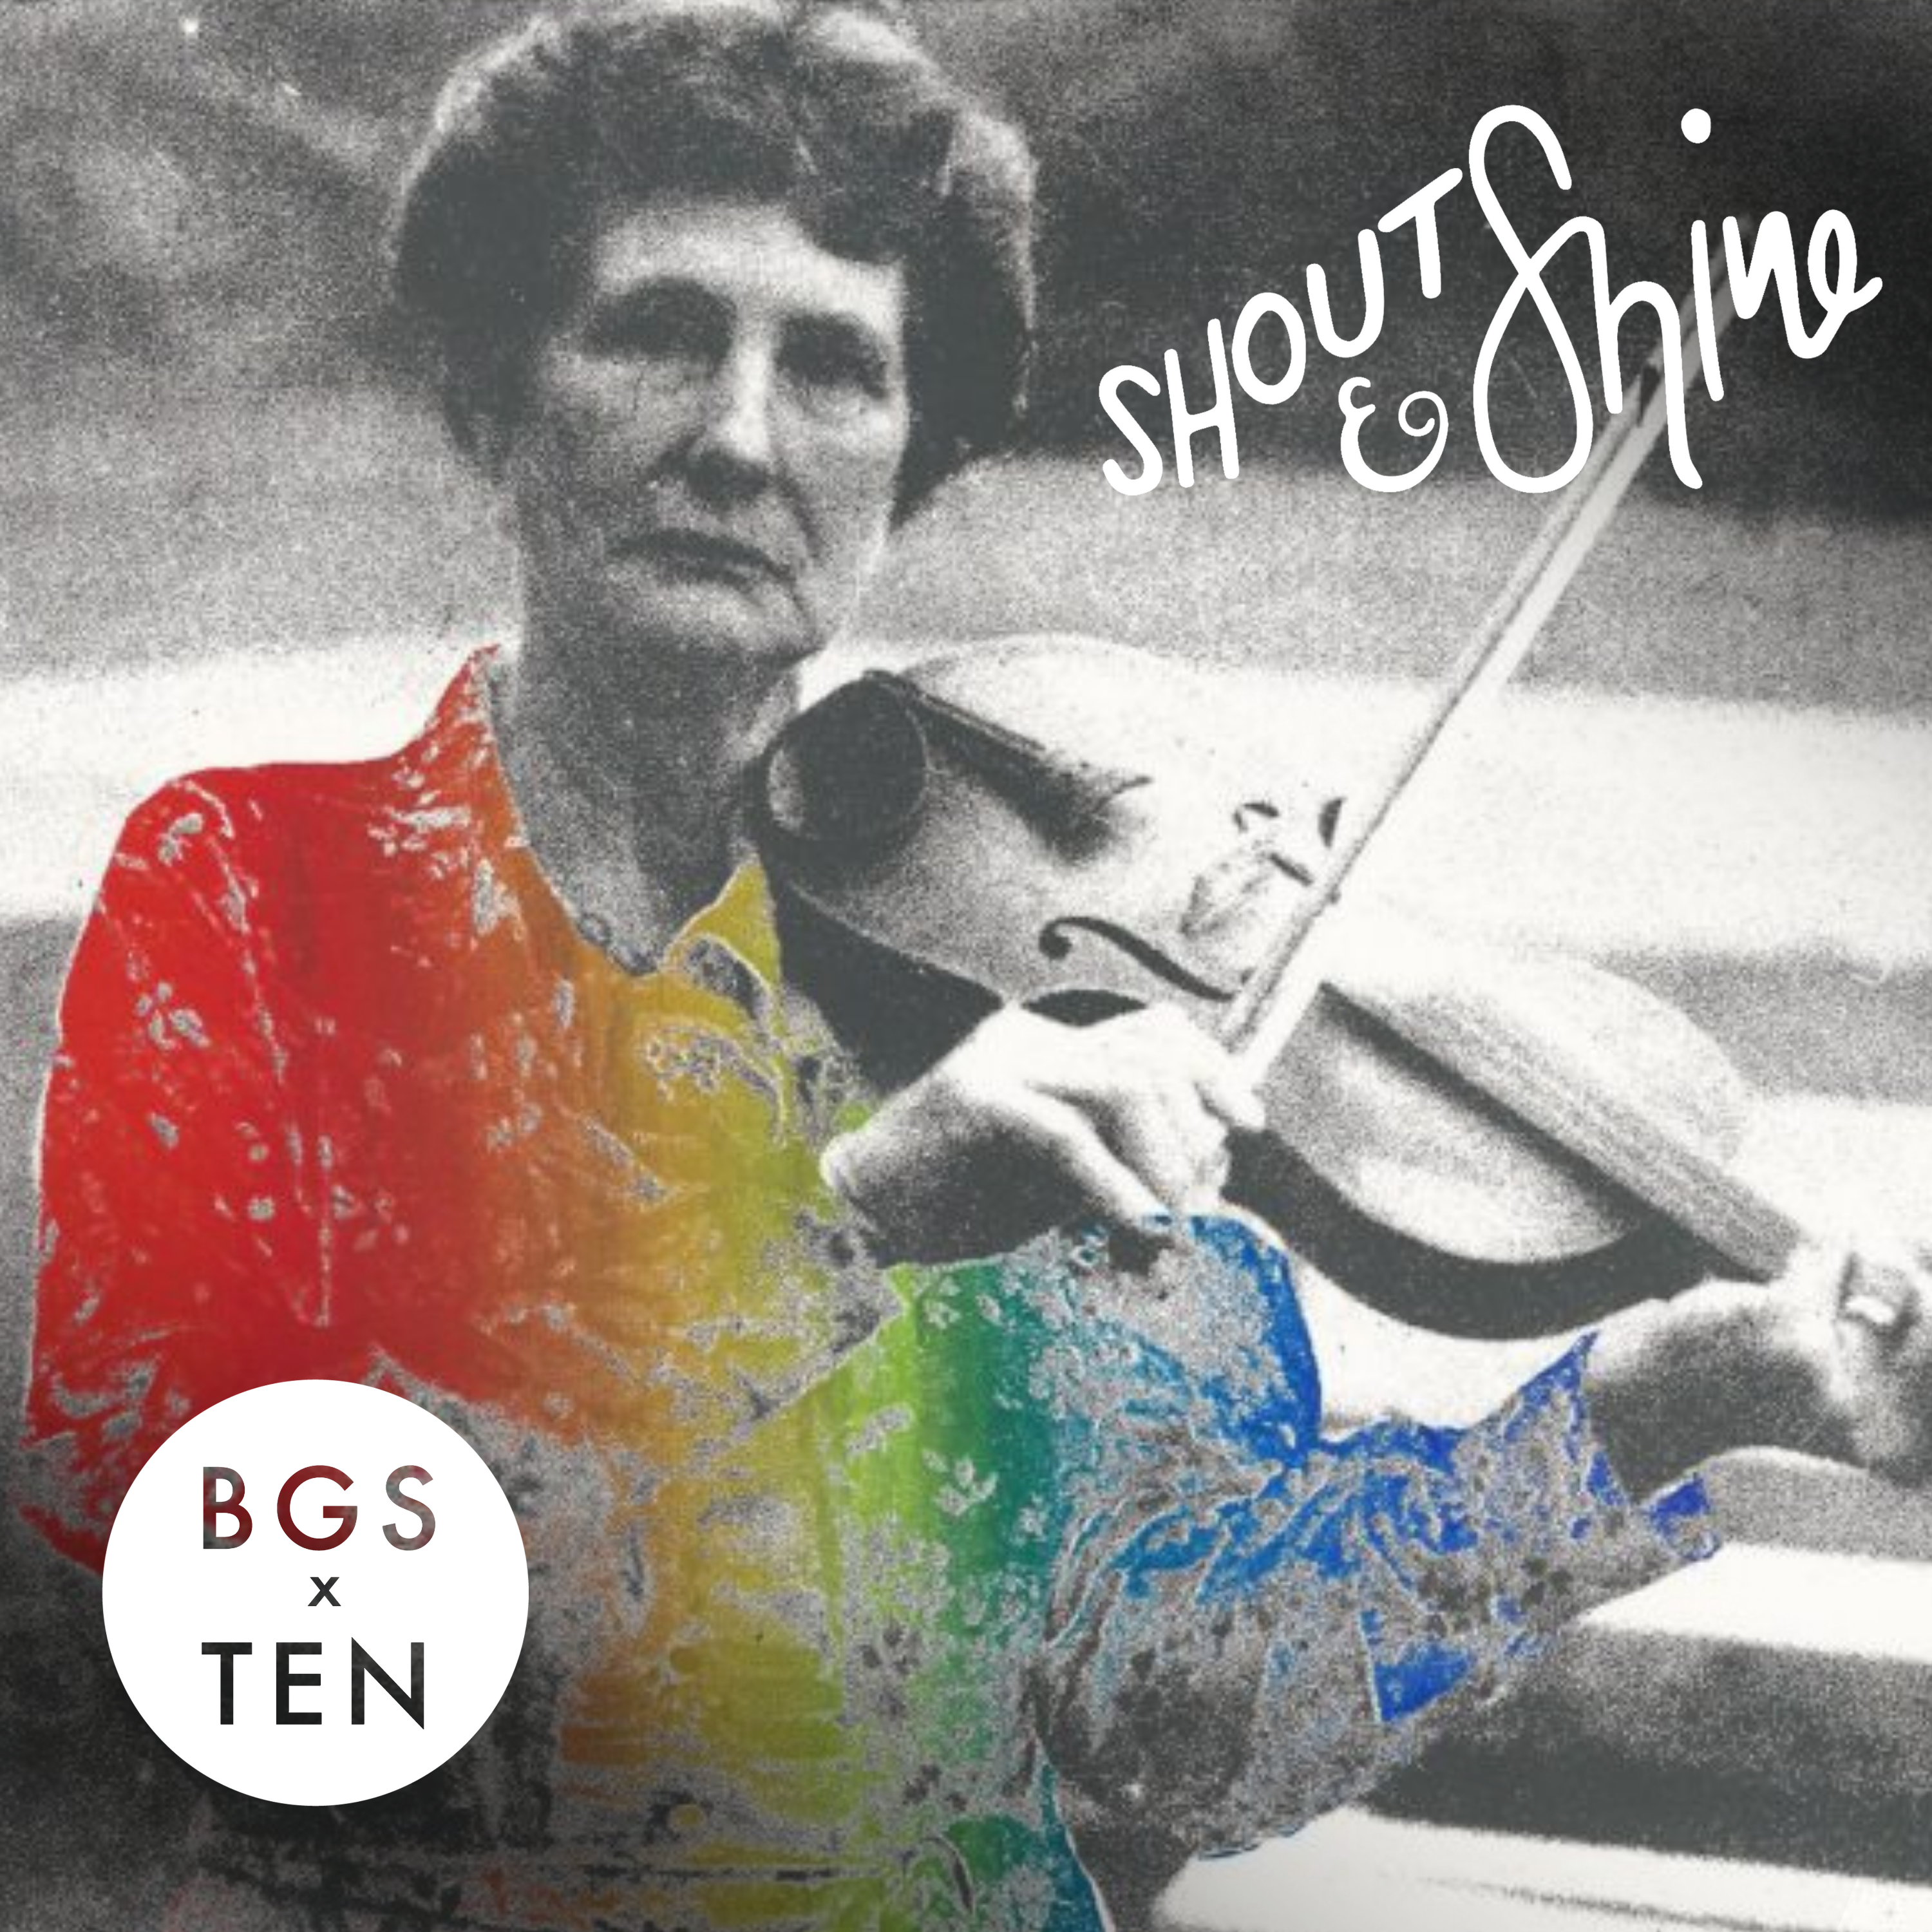 BGS Top 50 Moments, #4: Shout & Shine